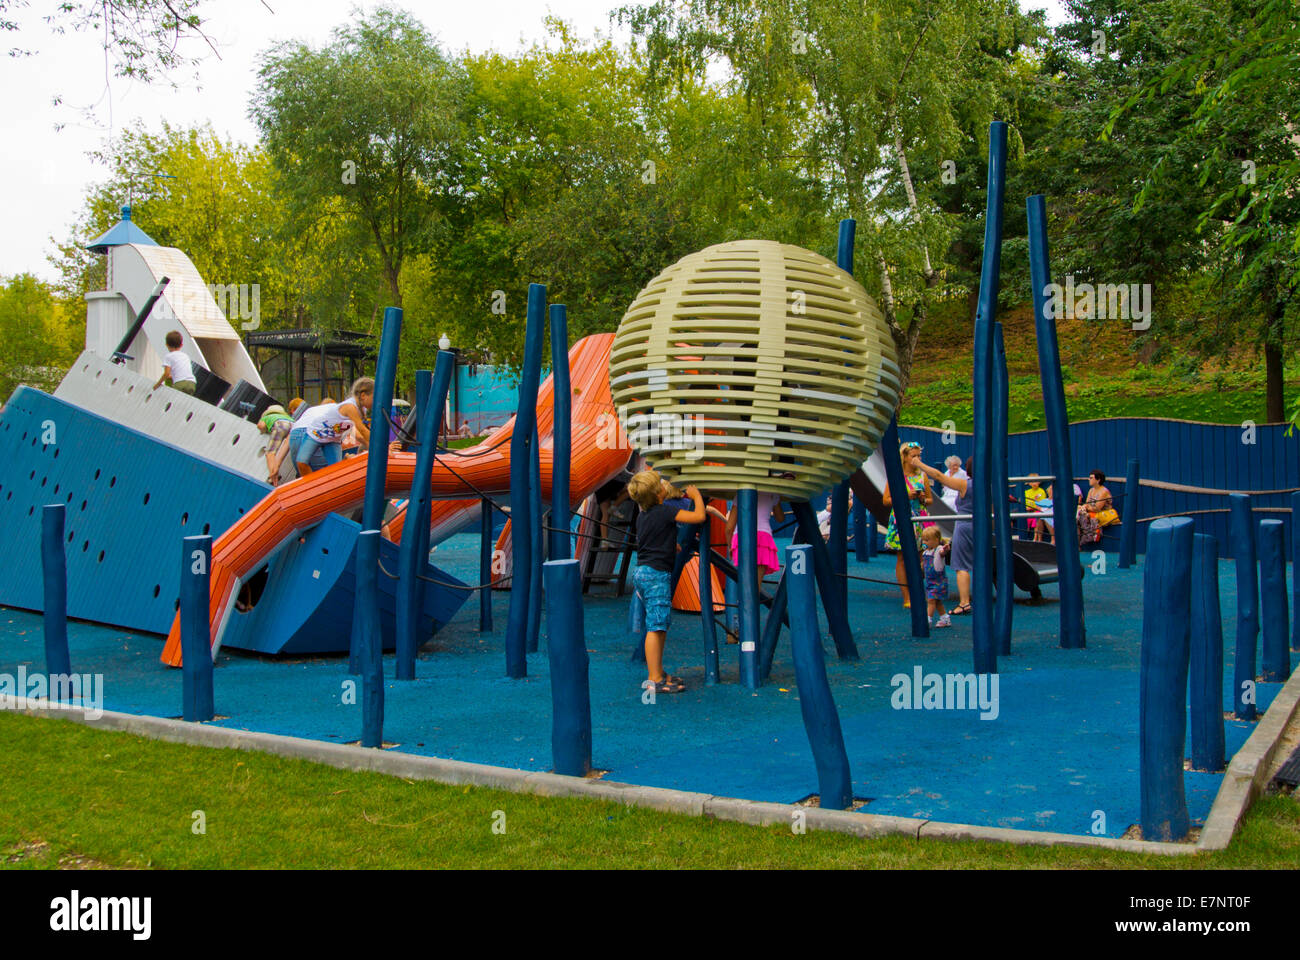 Children's playground, Gorky Park, Moscow, Russia, Europe Stock Photo